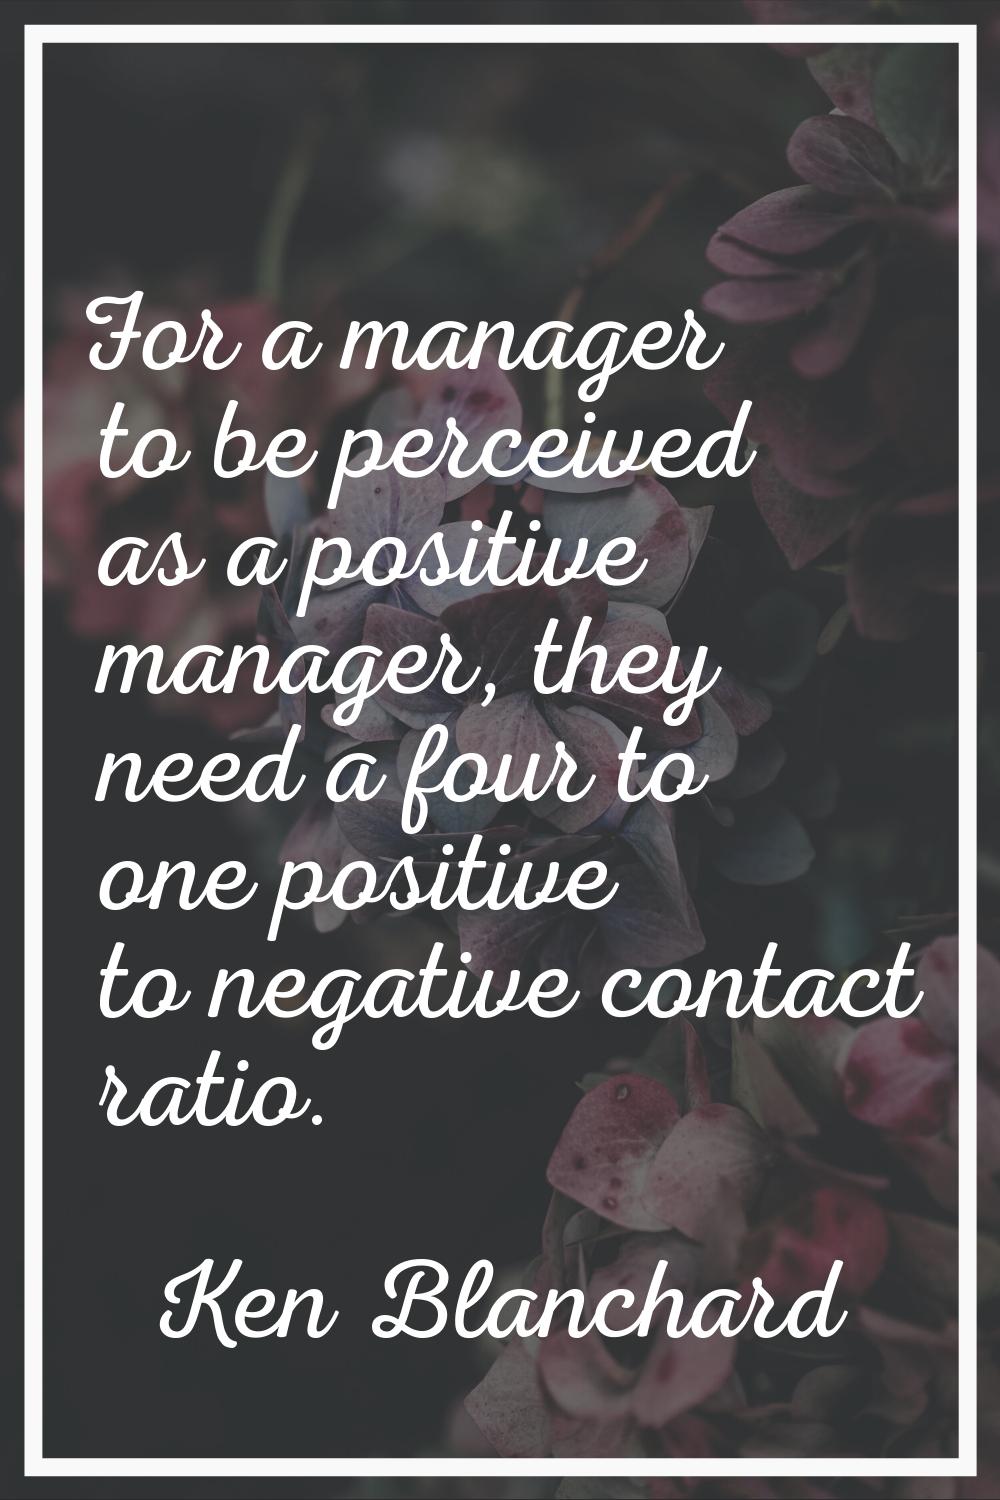 For a manager to be perceived as a positive manager, they need a four to one positive to negative c